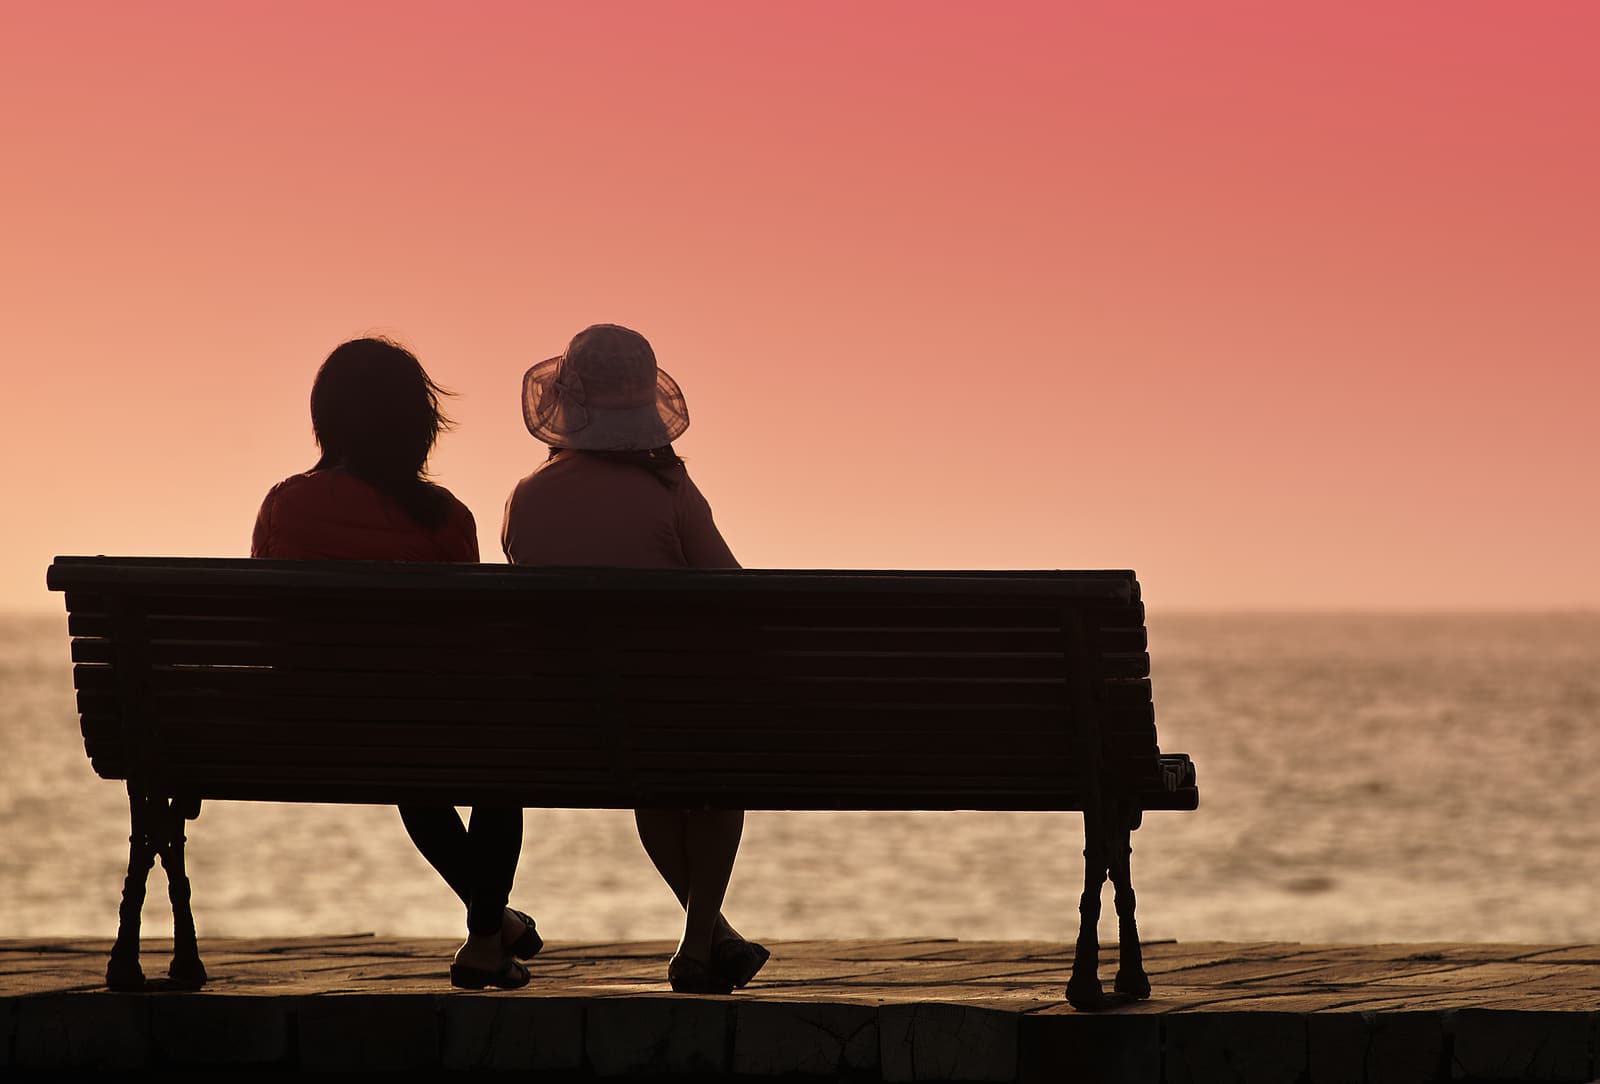 Silhouette of two women on a bench by the sea